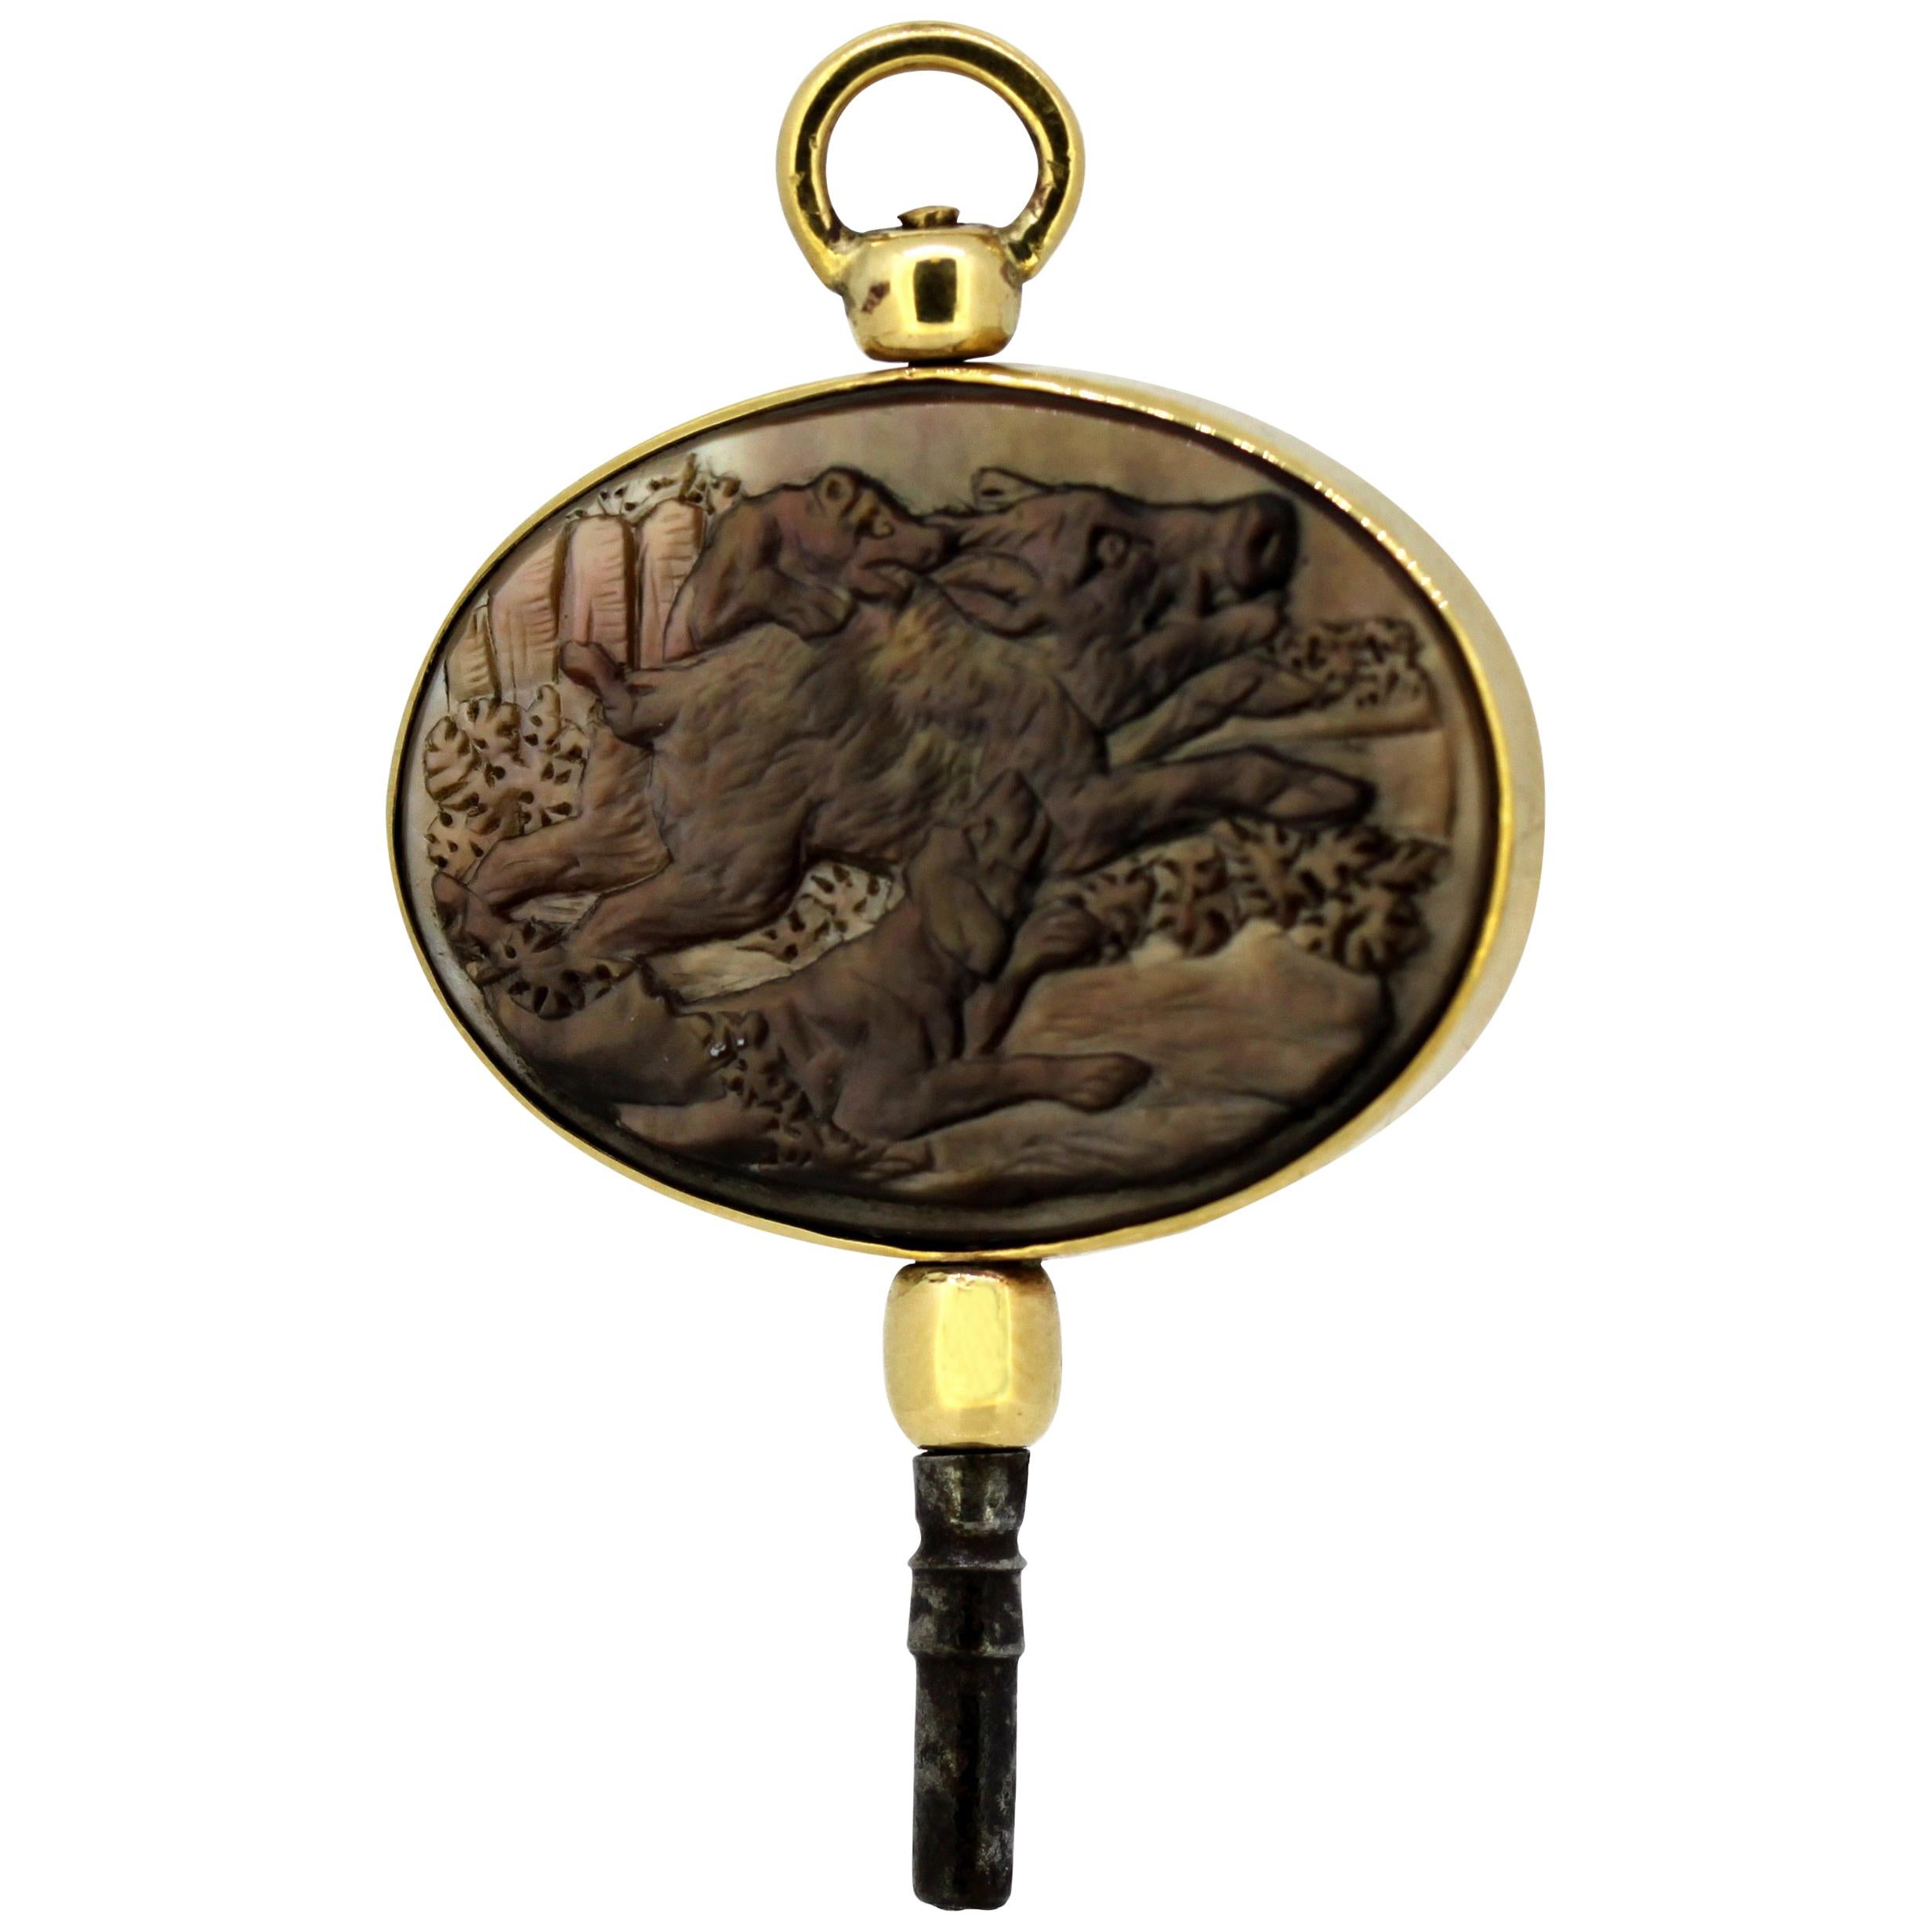 Victorian 15 Karat Gold Pocket Watch Key/Pendant with Mother of Pearl Carving